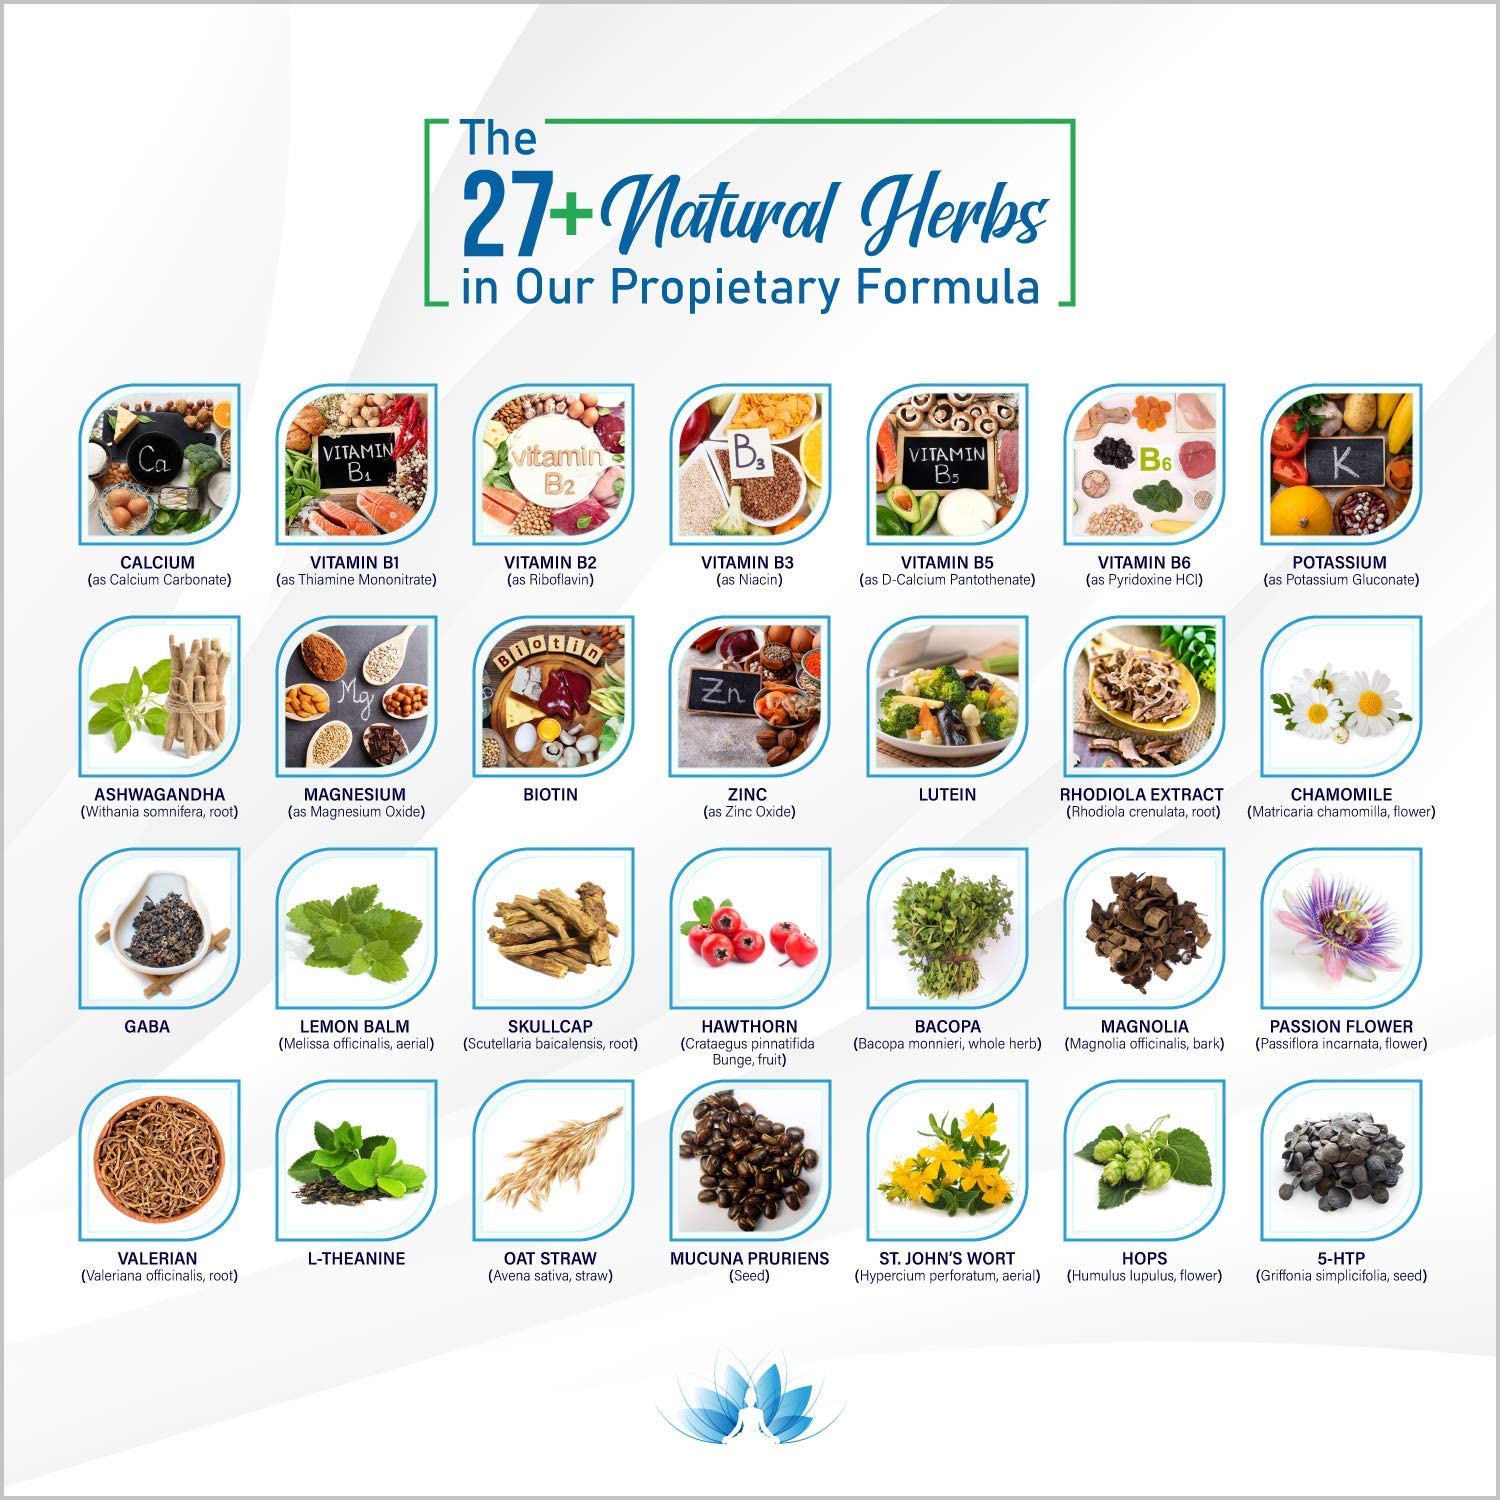 Over 27 natural herbs